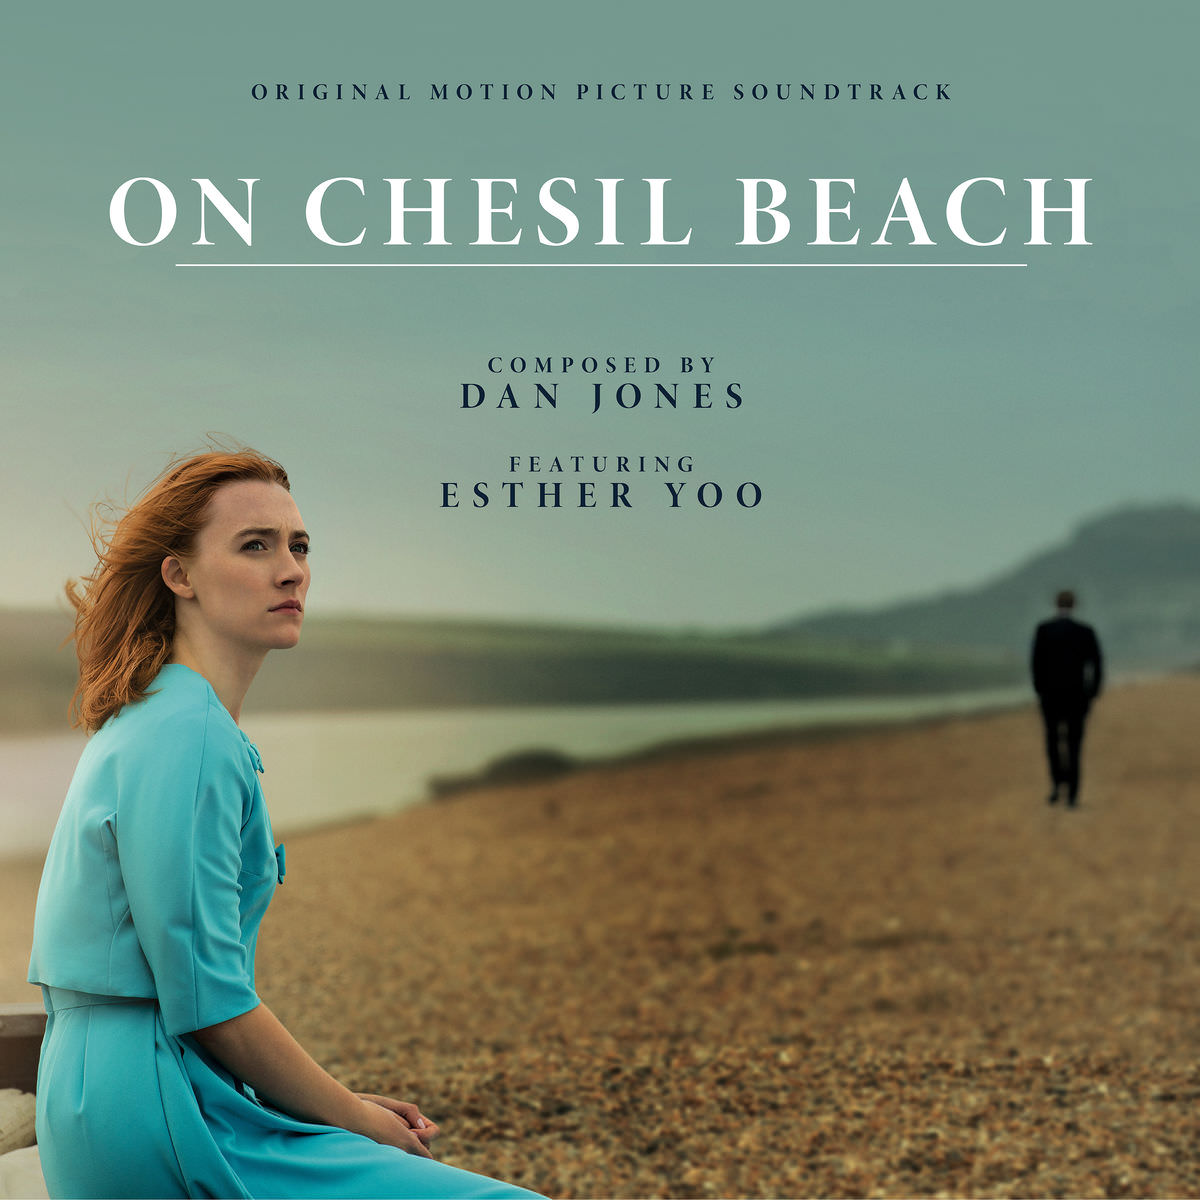 Dan Jones, BBC National Orchestra of Wales - On Chesil Beach (Original Motion Picture Soundtrack) (2018) [FLAC 24bit/48kHz]